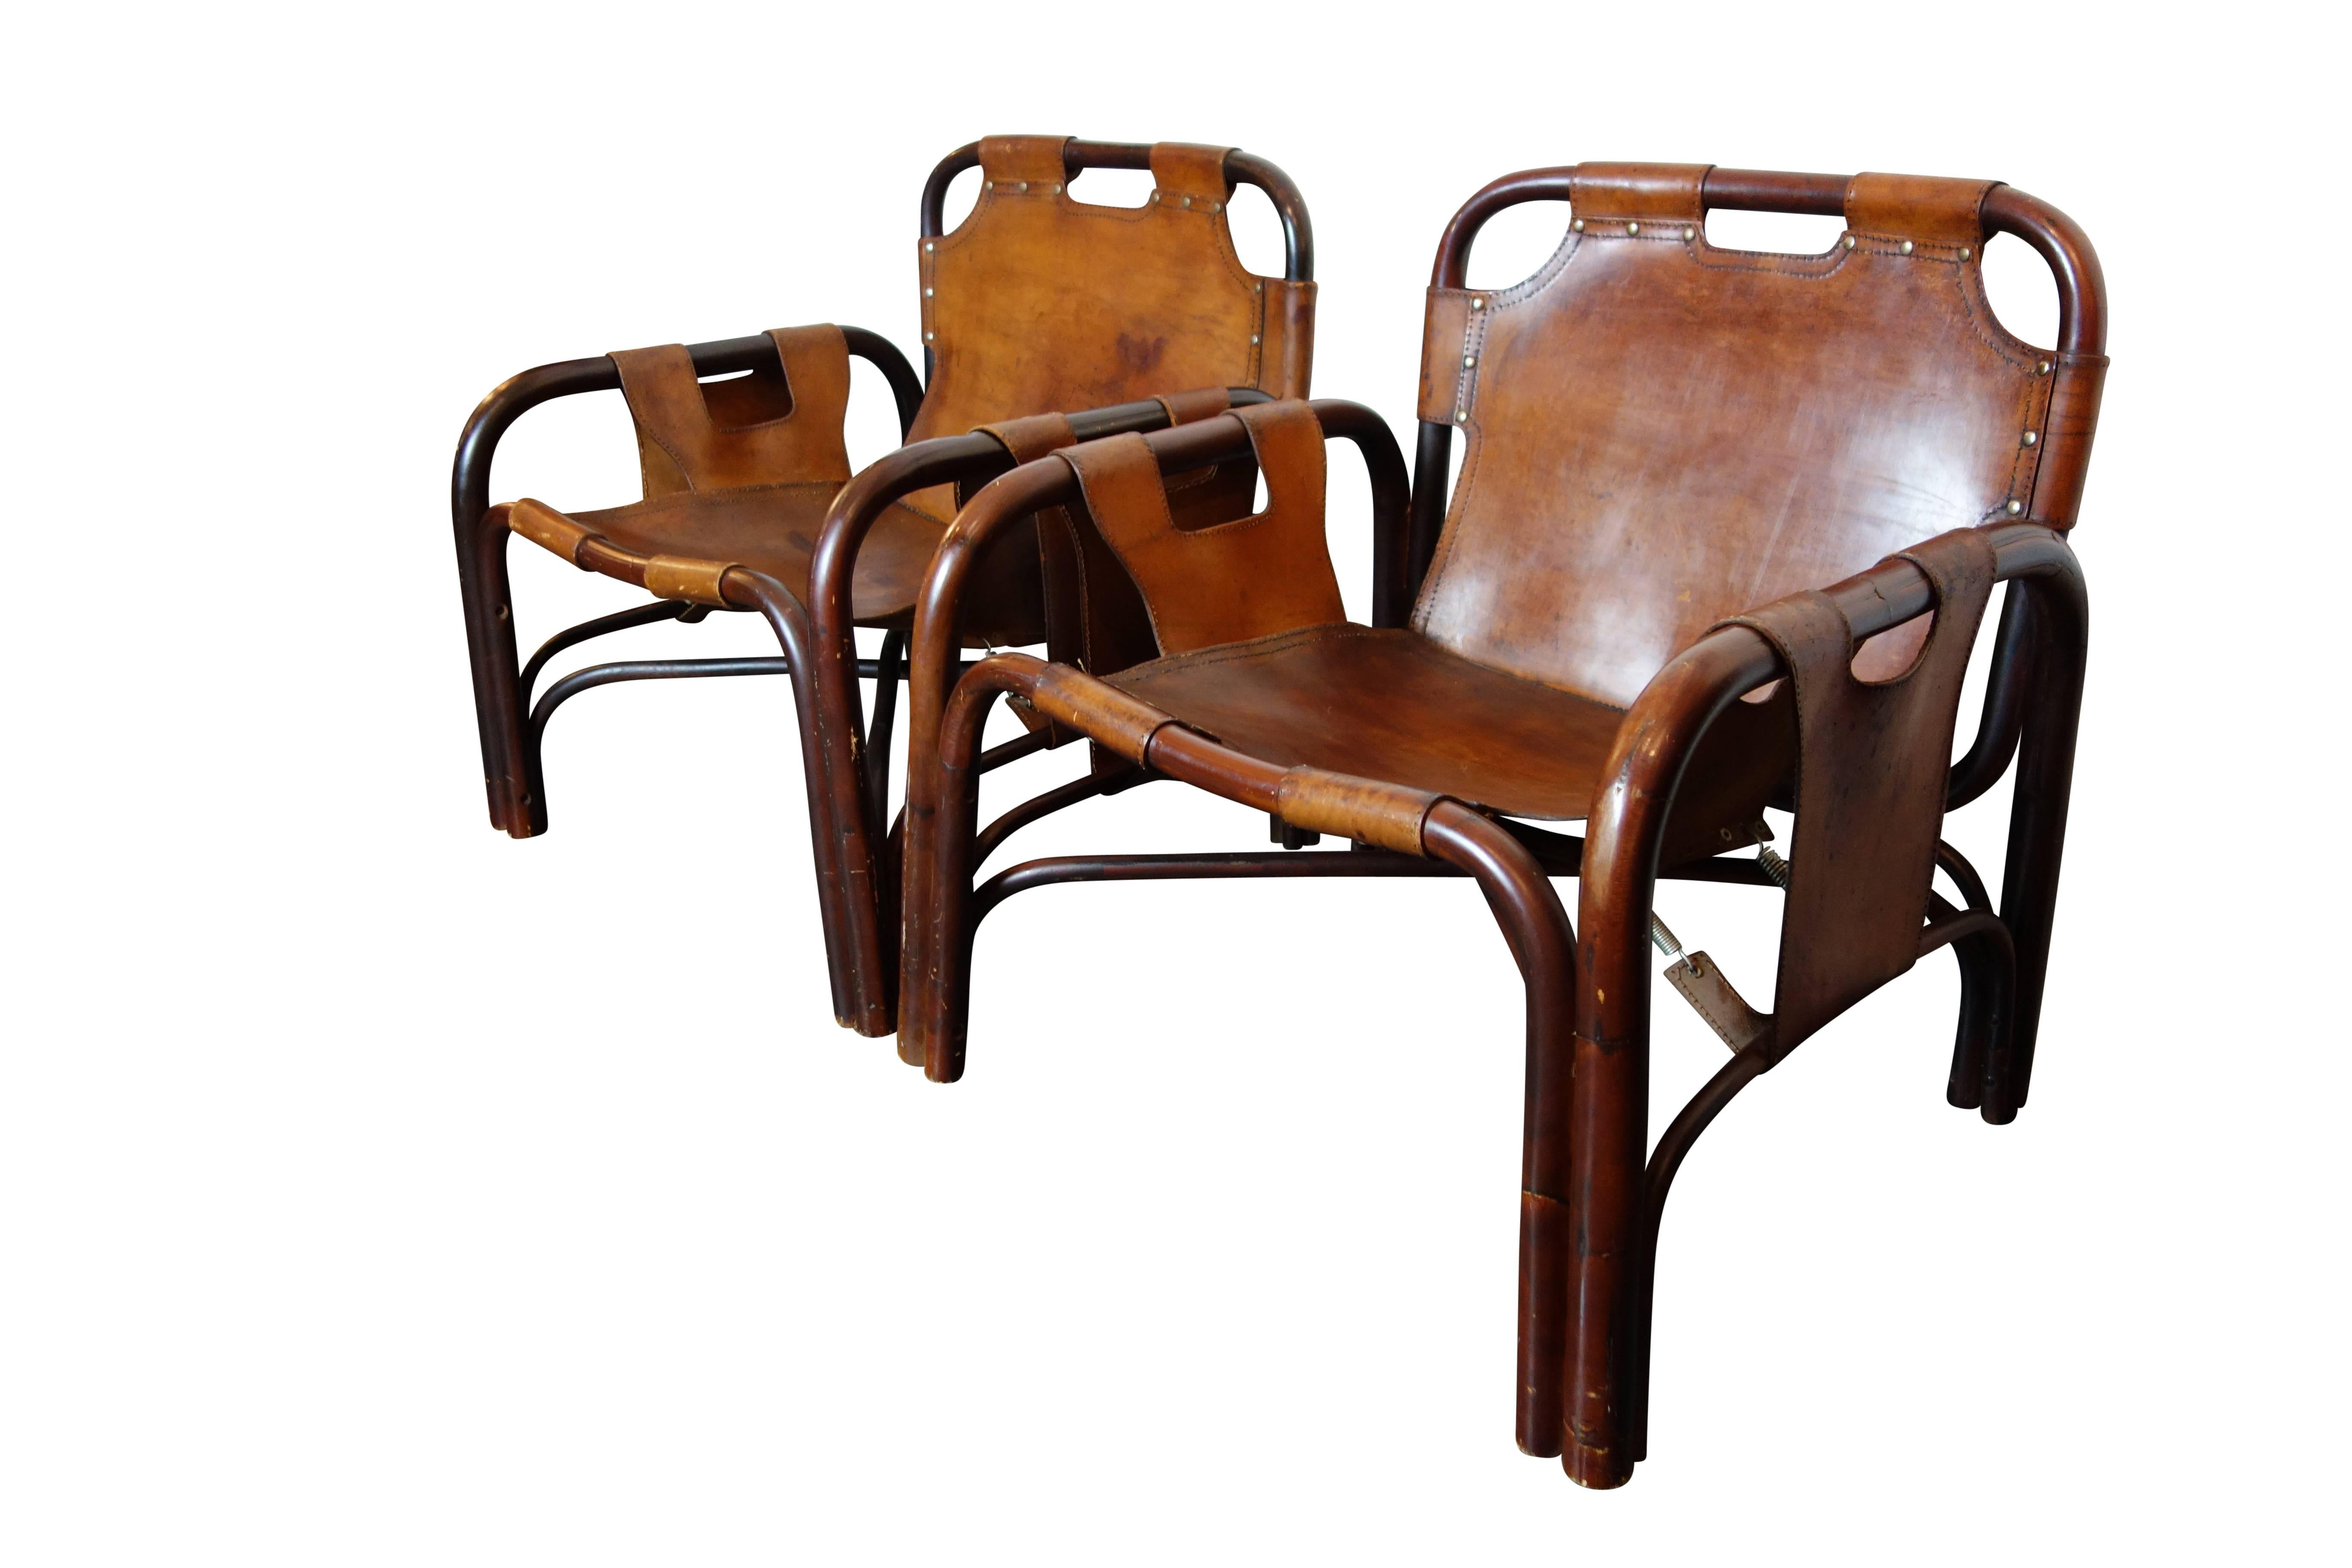 Pair of Italian Leather Safari Chairs in the Style of Arne Norell 1